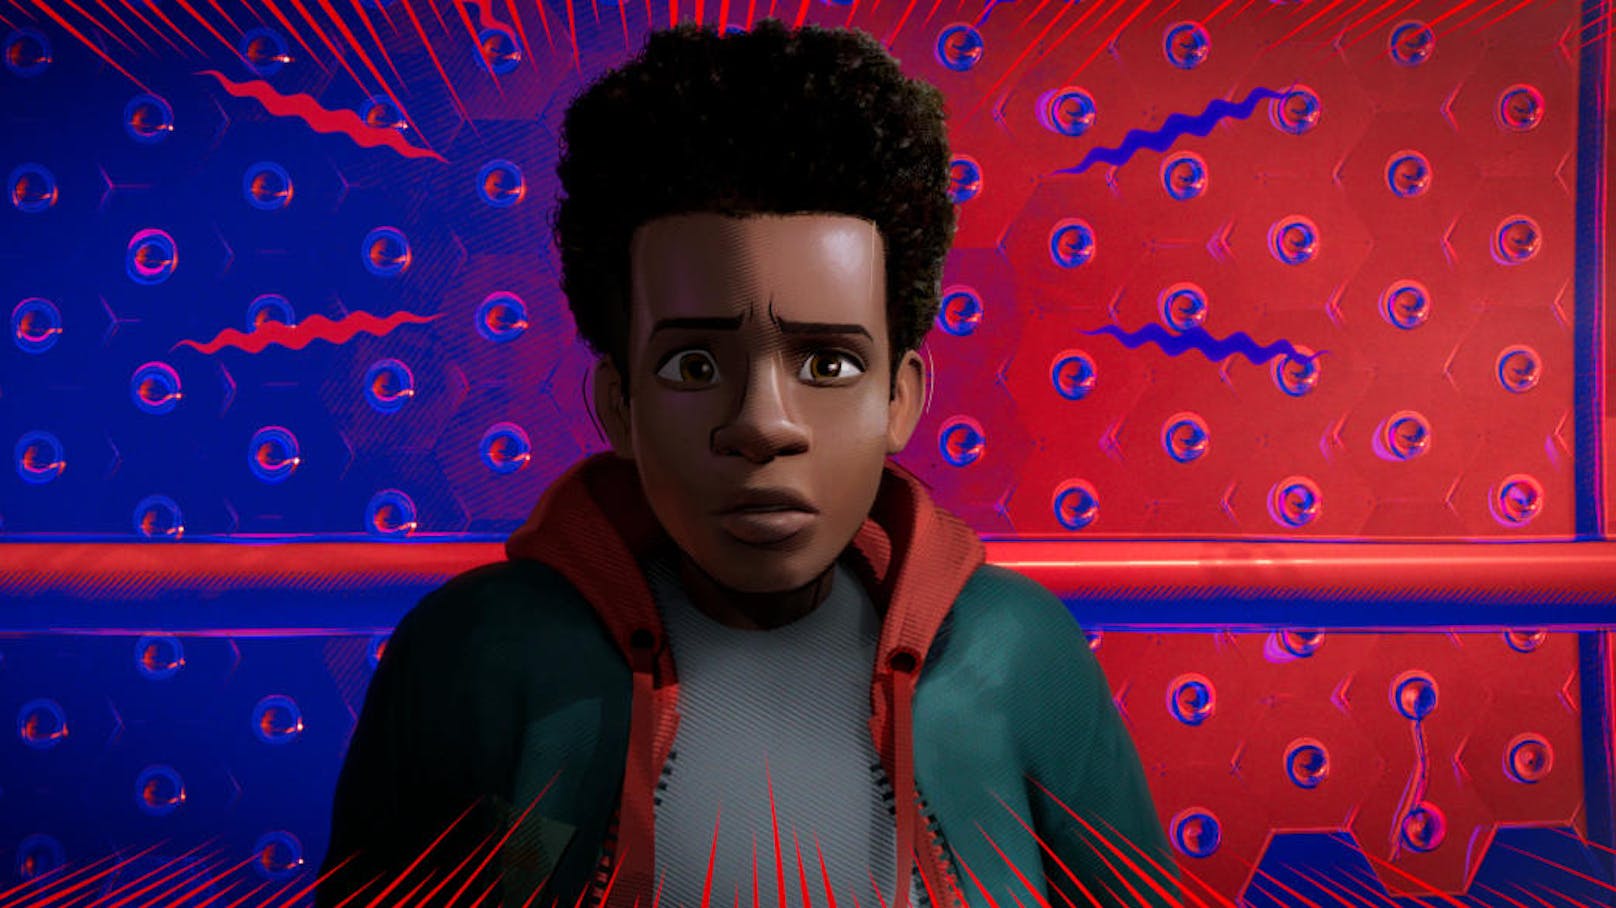 Miles Morales in "Spider-Man: A New Universe"